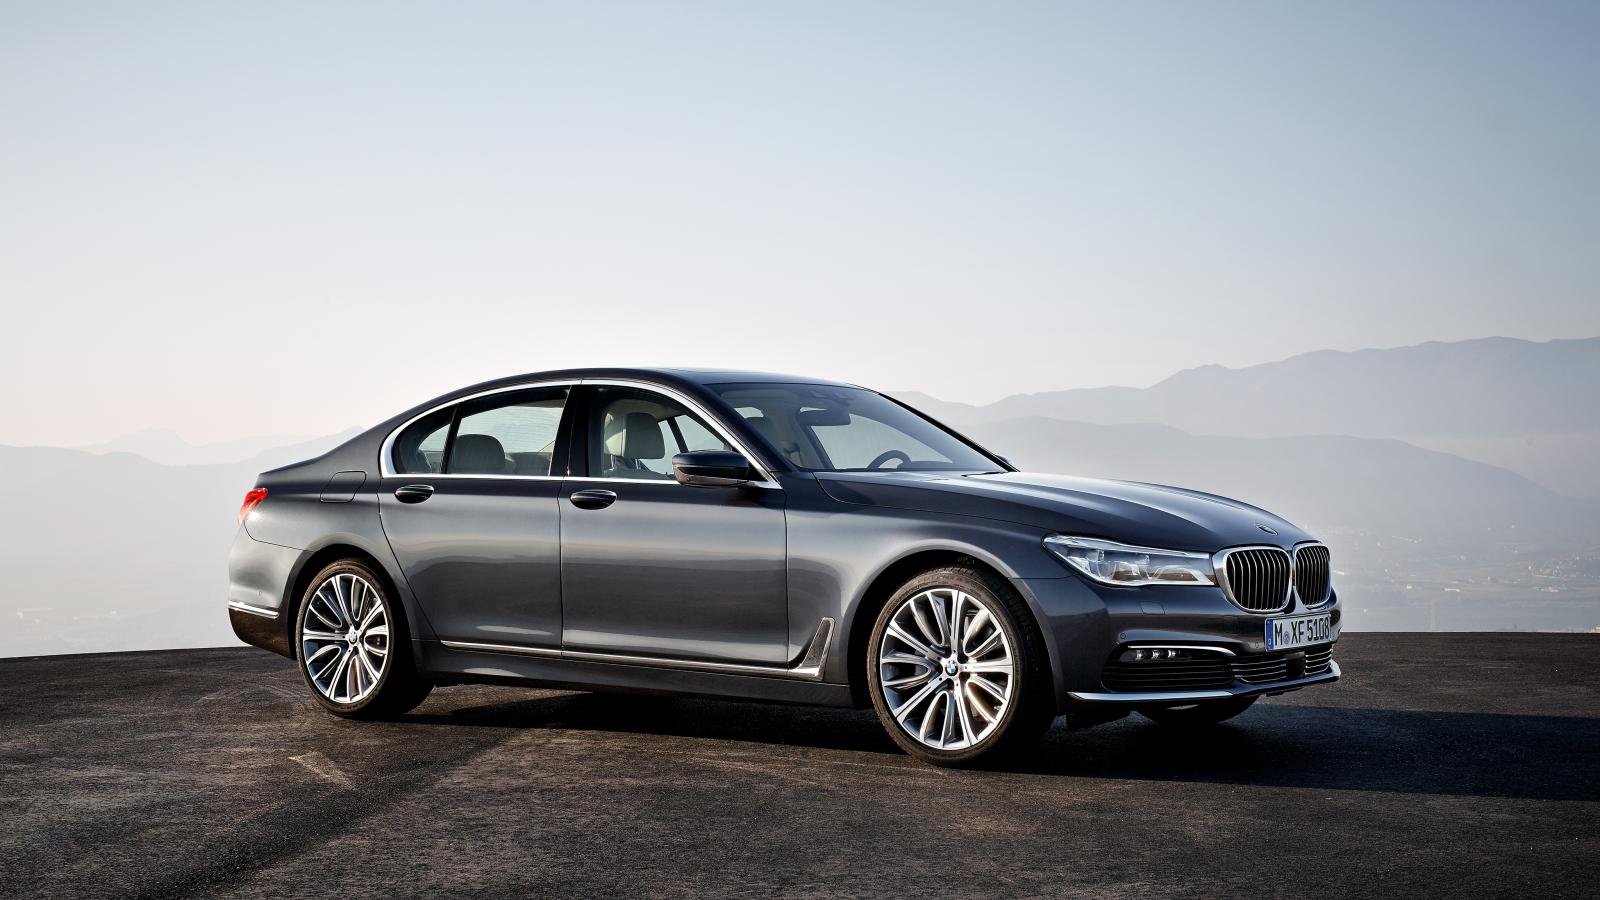 Hd Wallpapers Bmw 7 Series